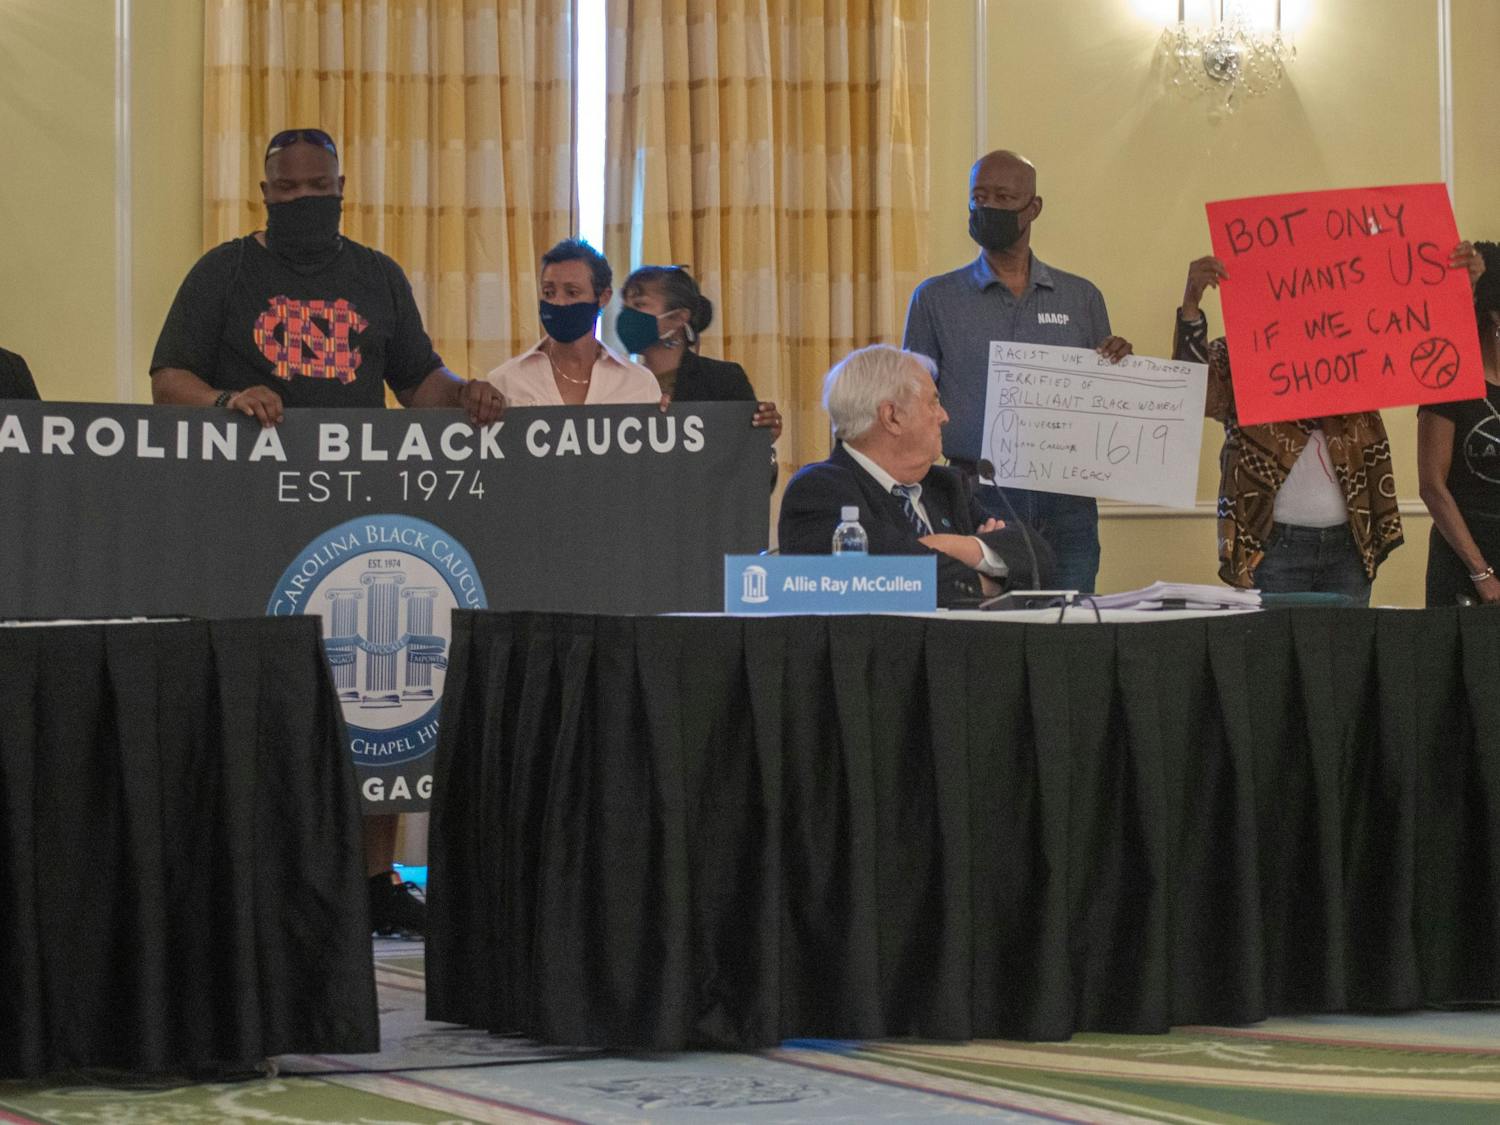 Members of the Carolina Black protest the UNC decision to deny tenure to Nikole Hannah-Jones at the UNC Board of Trustees meeting at the Carolina Inn on Thursday May 20, 2021.